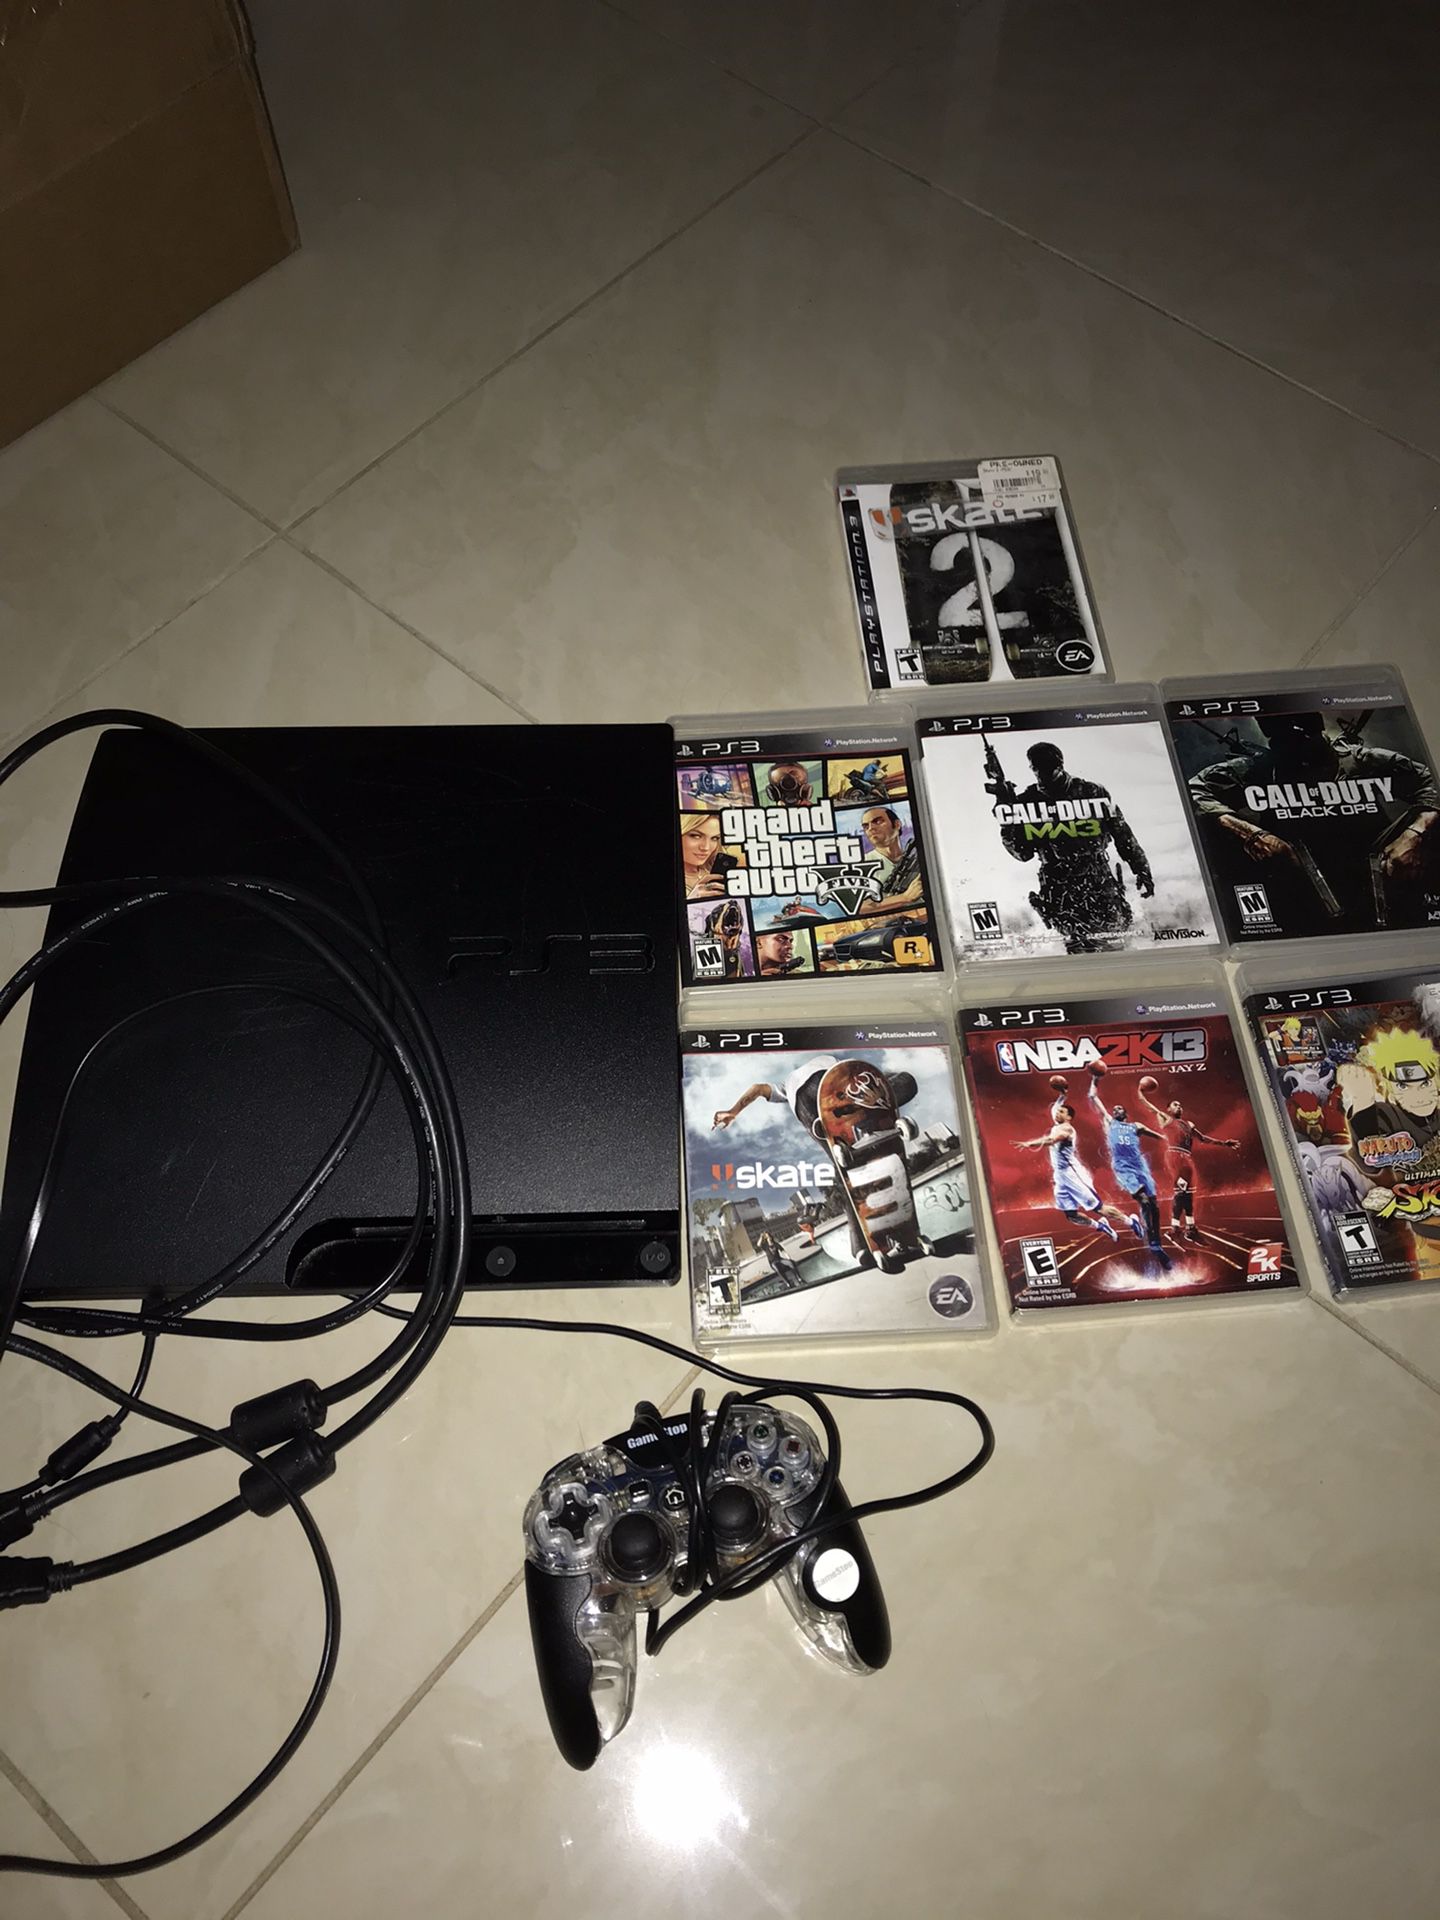 PS3 with controller, Cables, and games